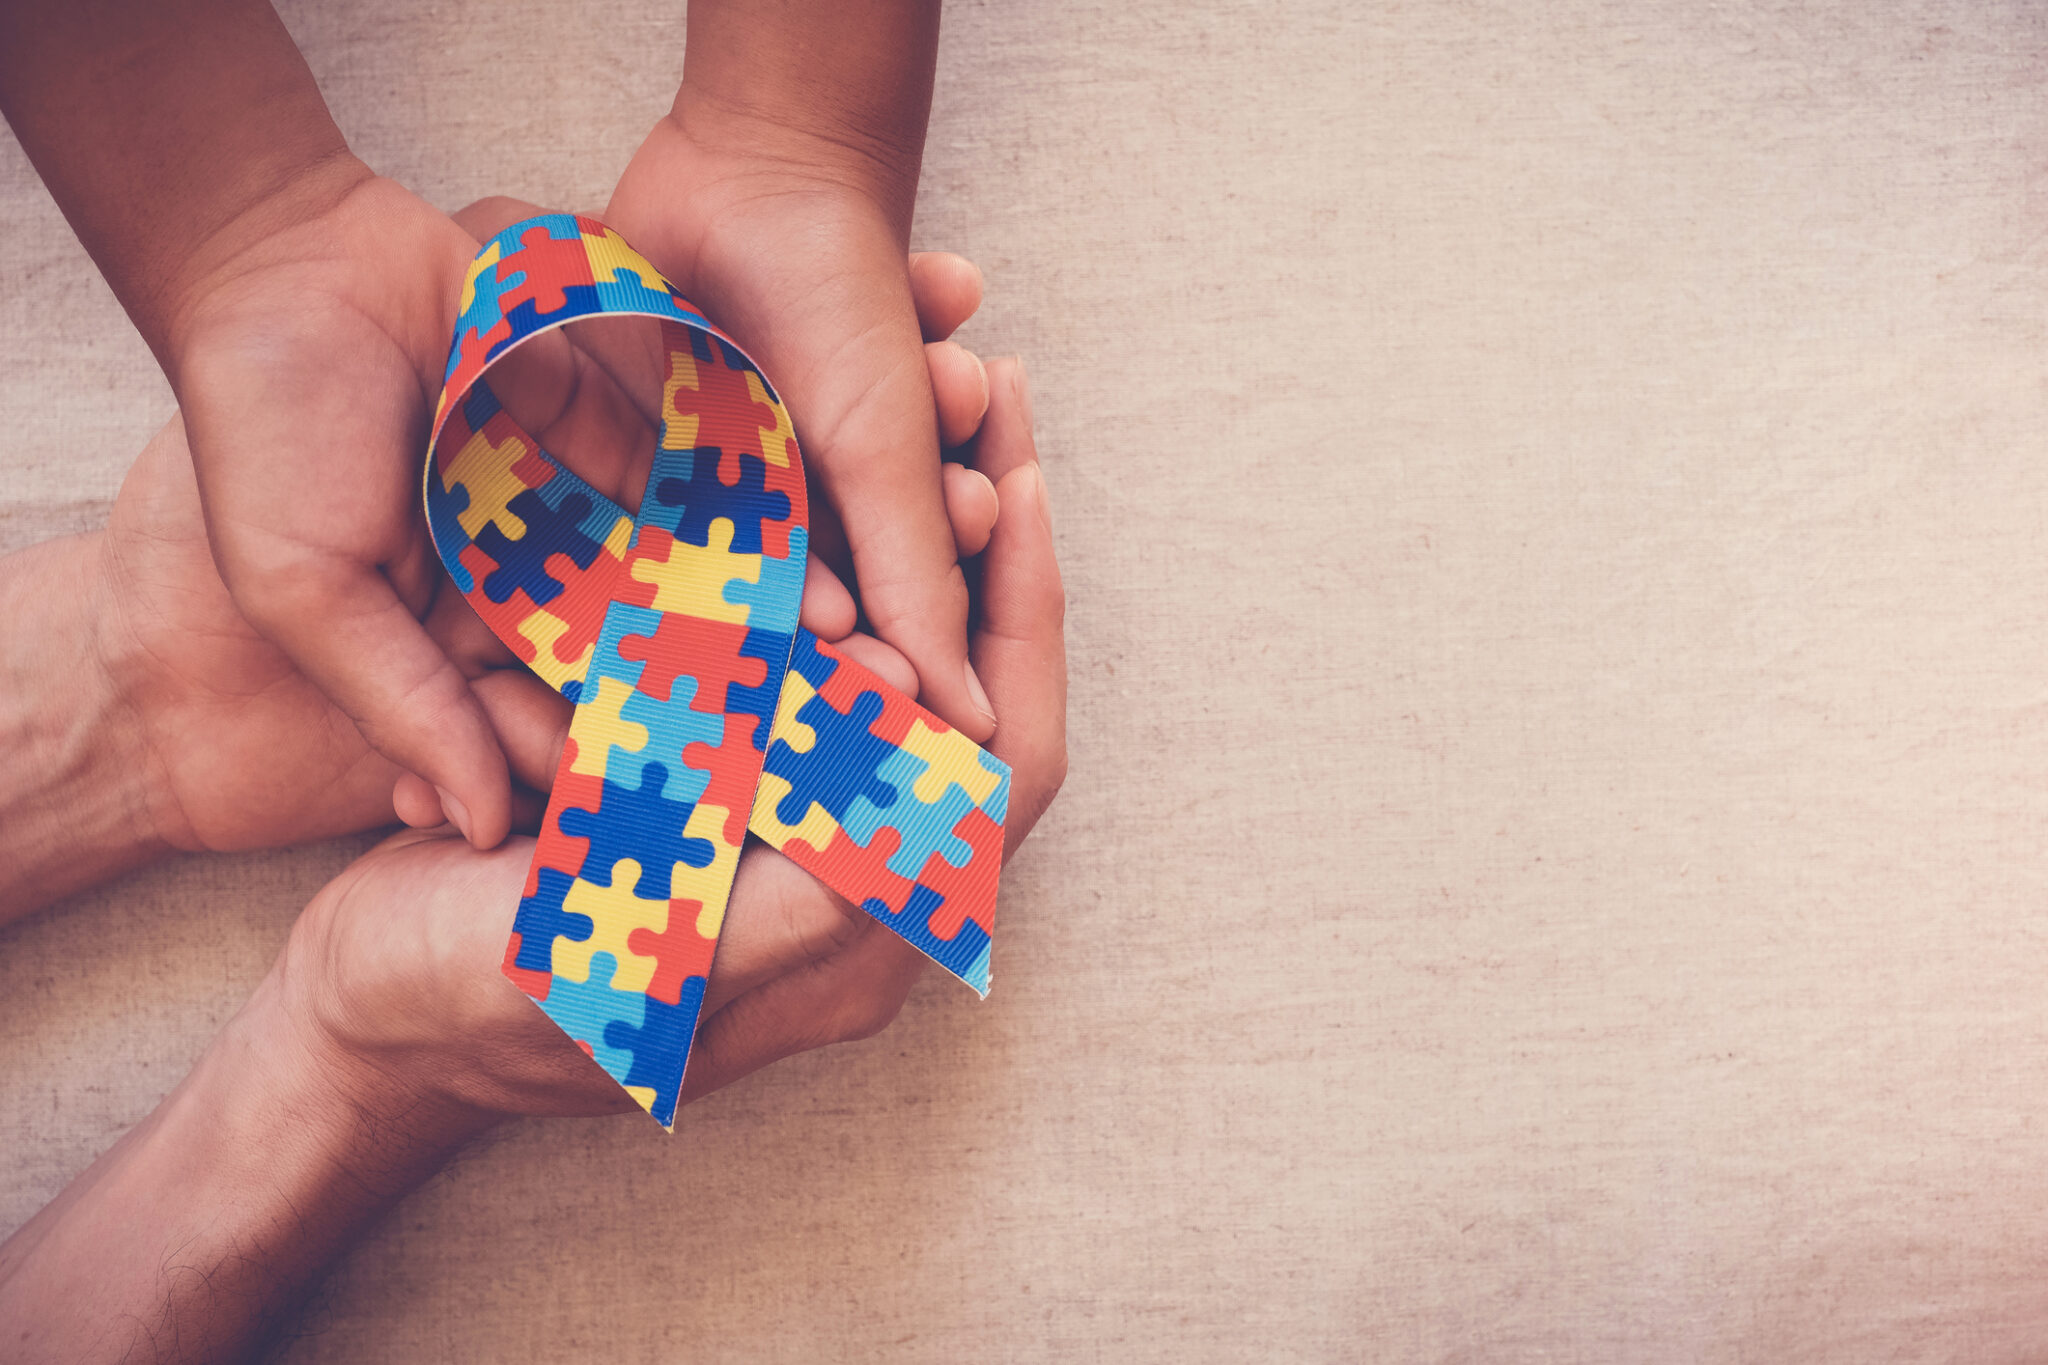 Caring for People with Autism